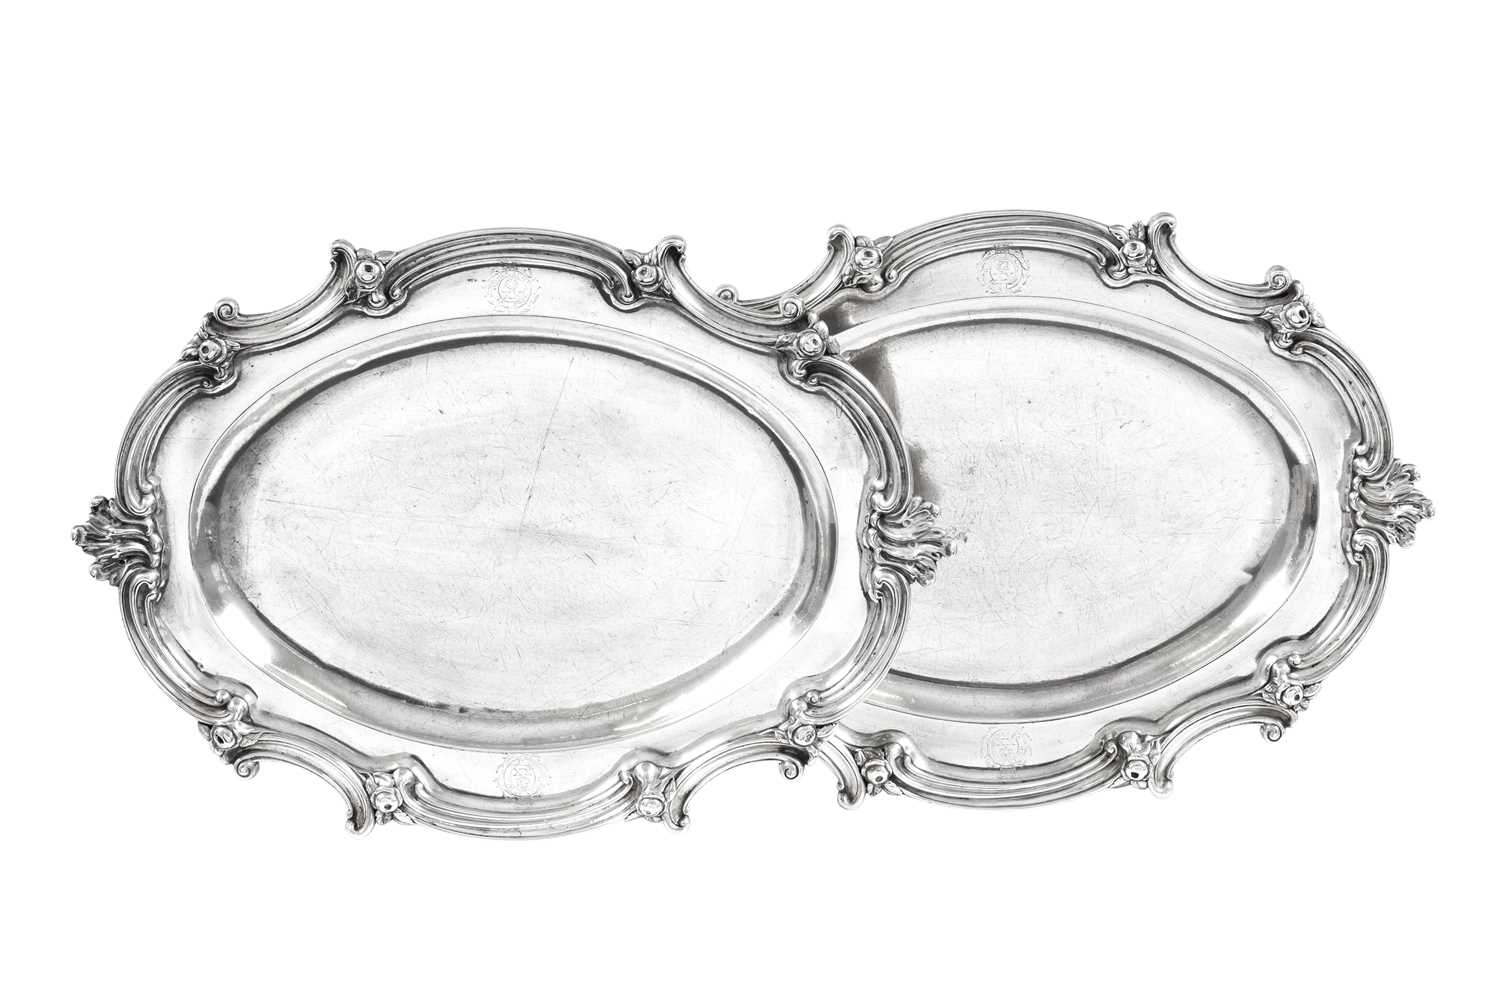 Lot 2282 - A Pair of Victorian Silver Meat-Dishes